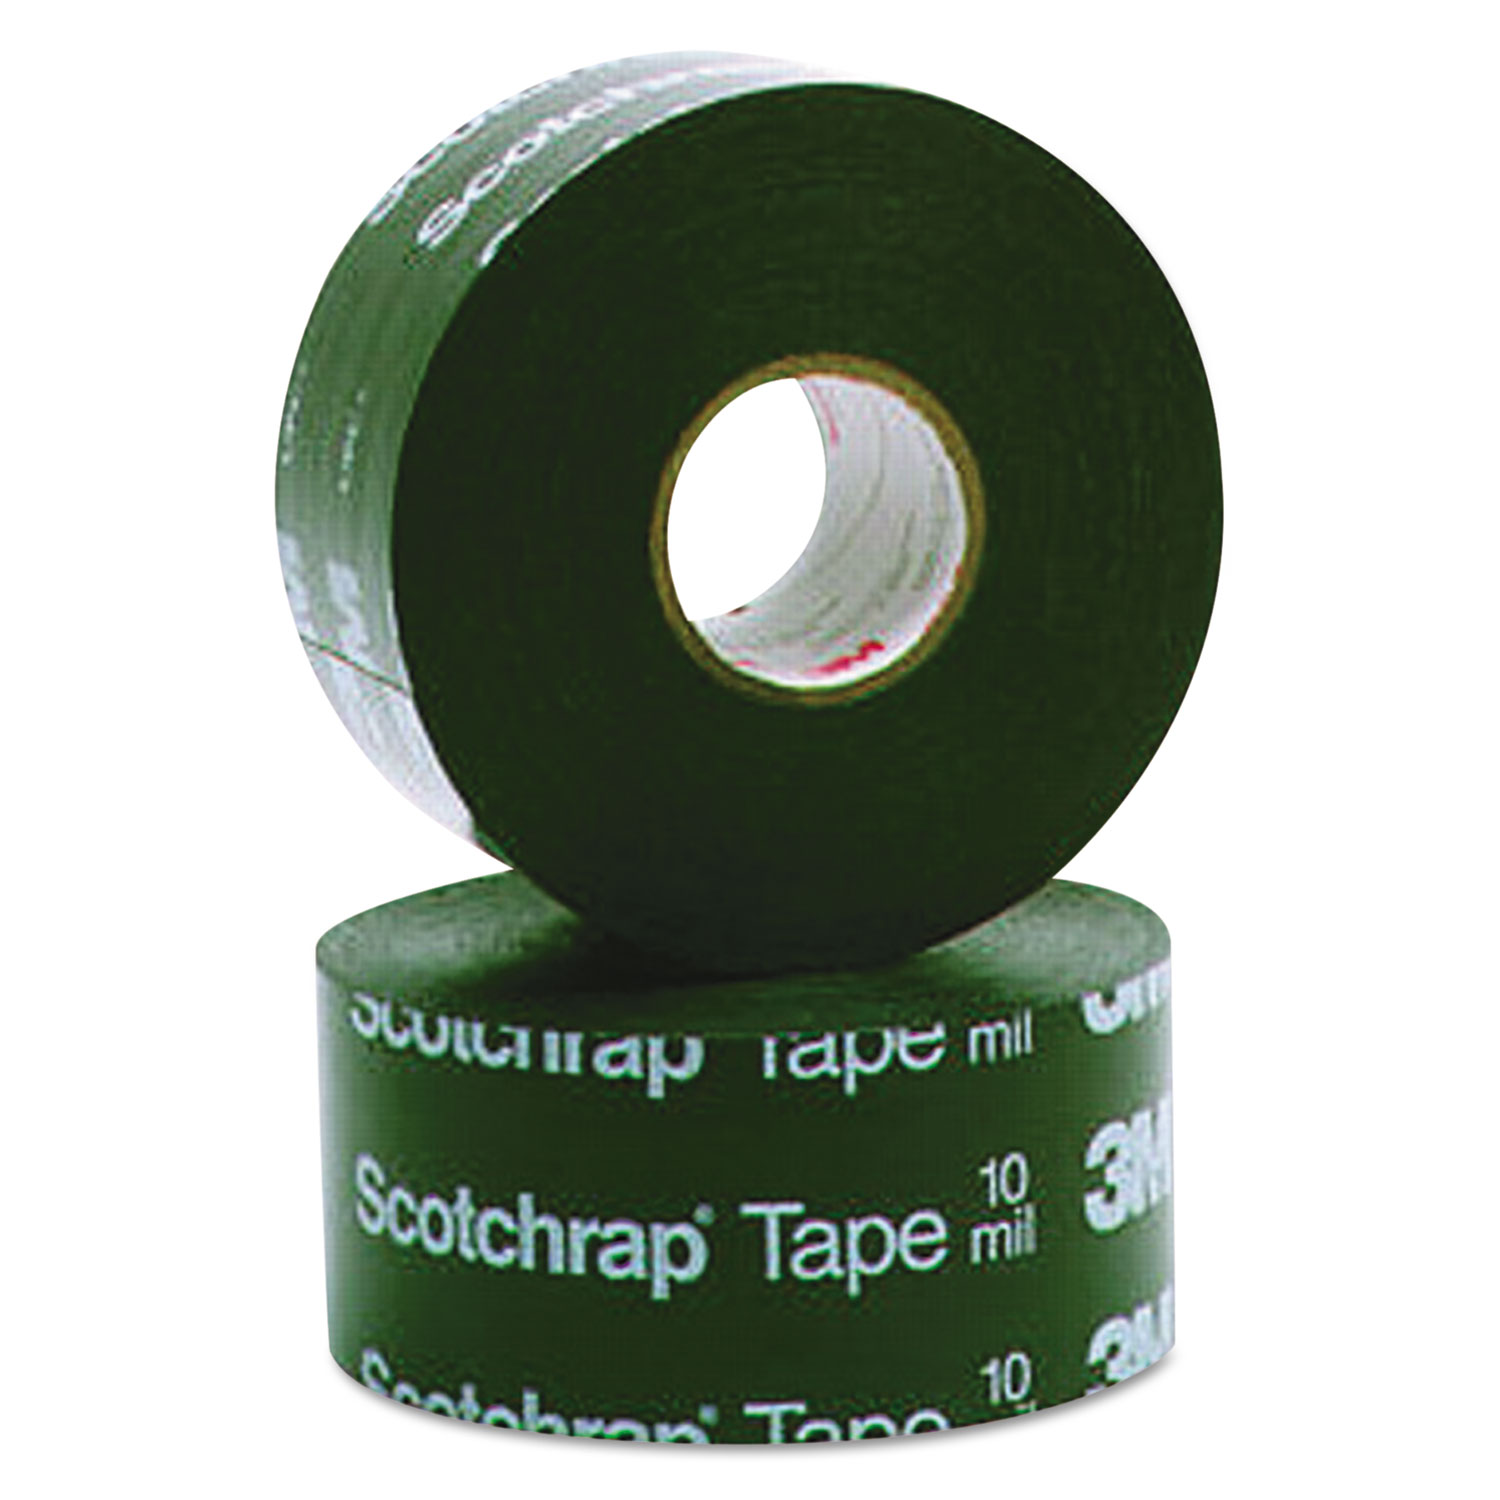  3M 7000057485 Scotchrap All-Weather Corrosion Protection Tape, 4 x 100 ft, Black (MMM10646) 